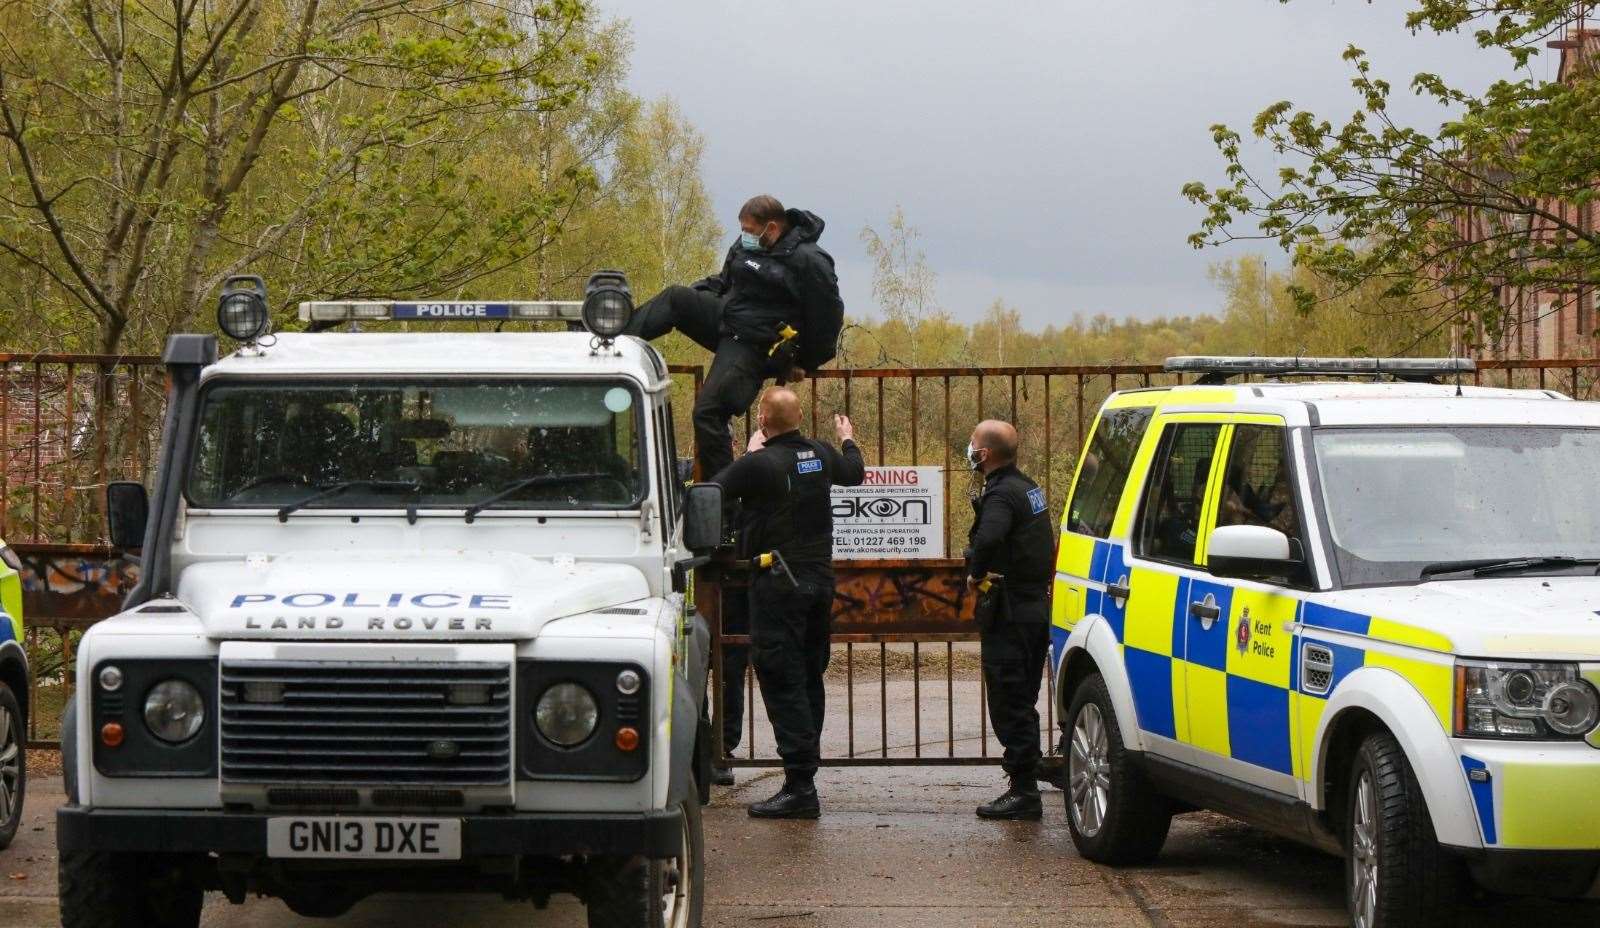 Police search the former Snowdown Colliery Picture: UKNIP